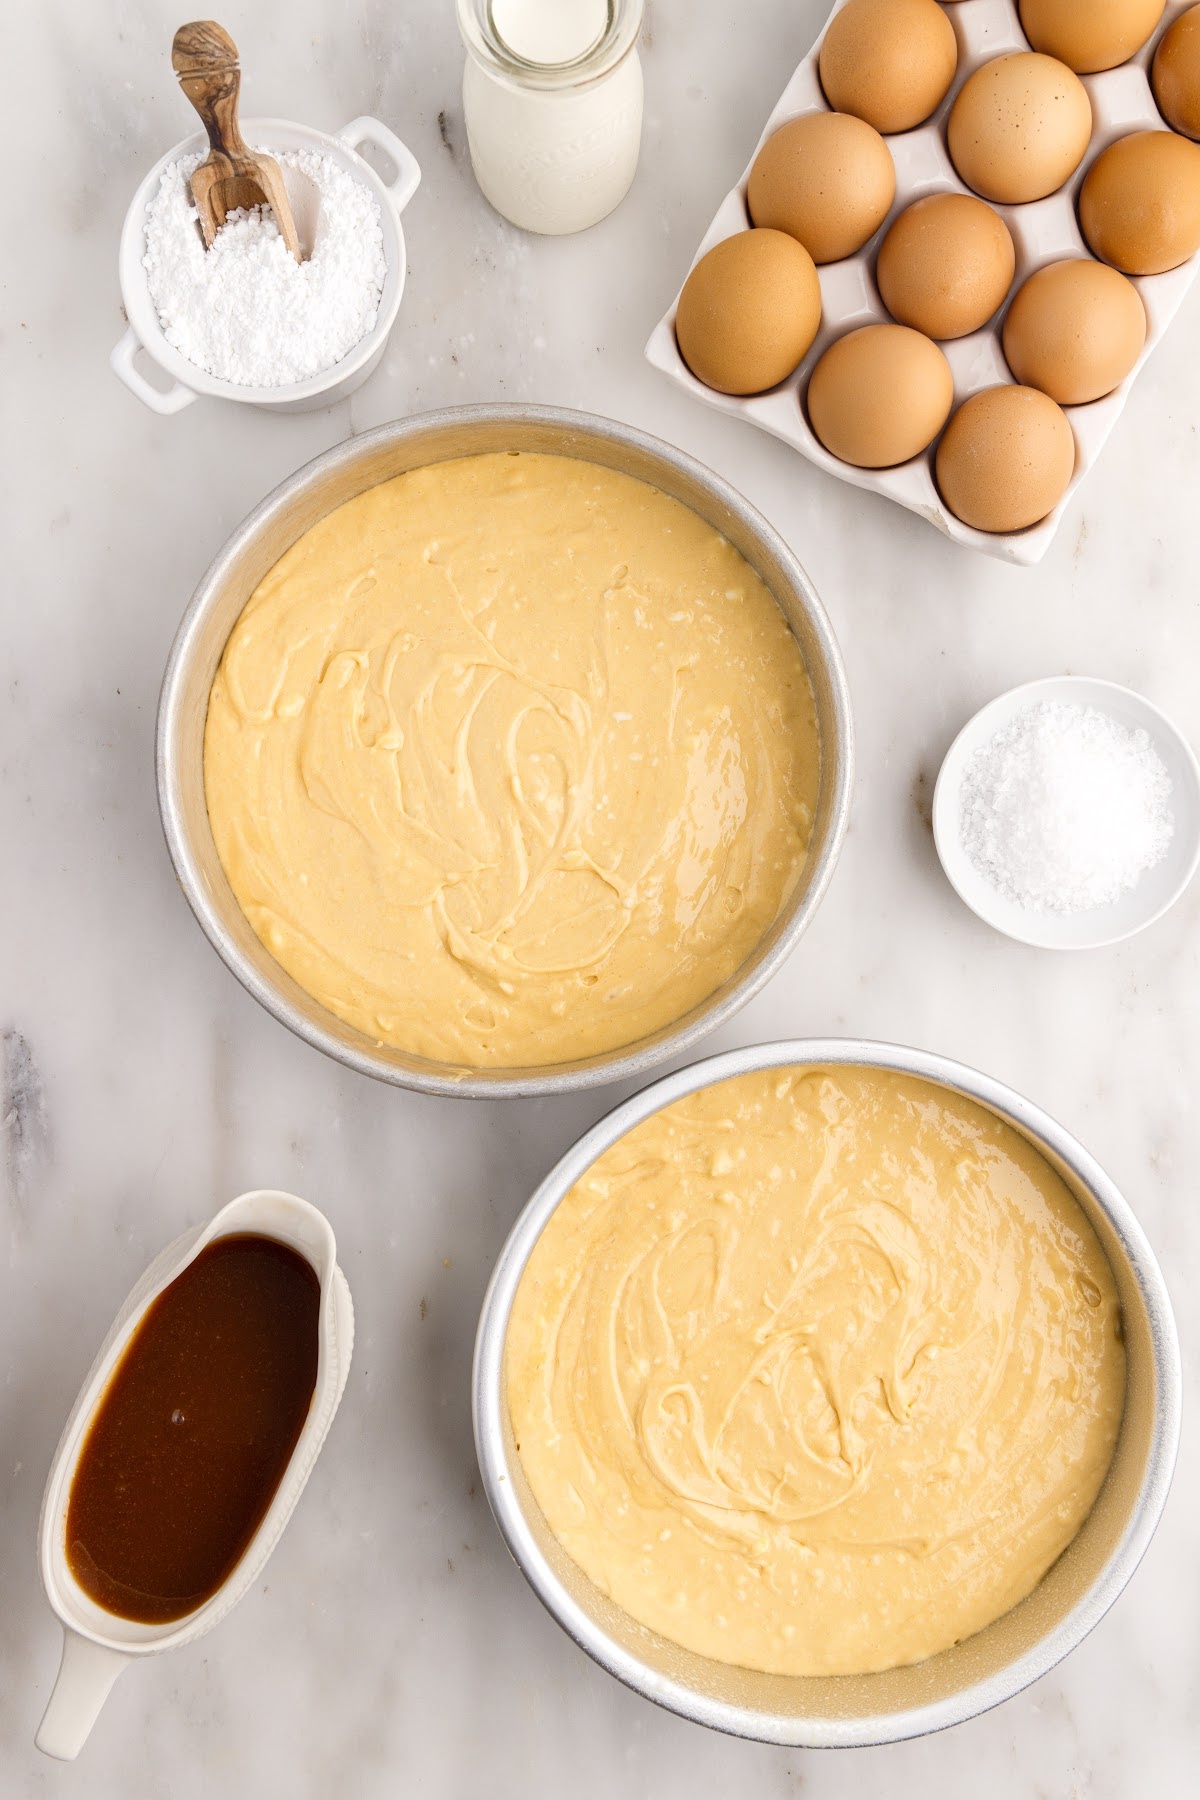 Two round cake pans filled with Salted Caramel Cake batter.